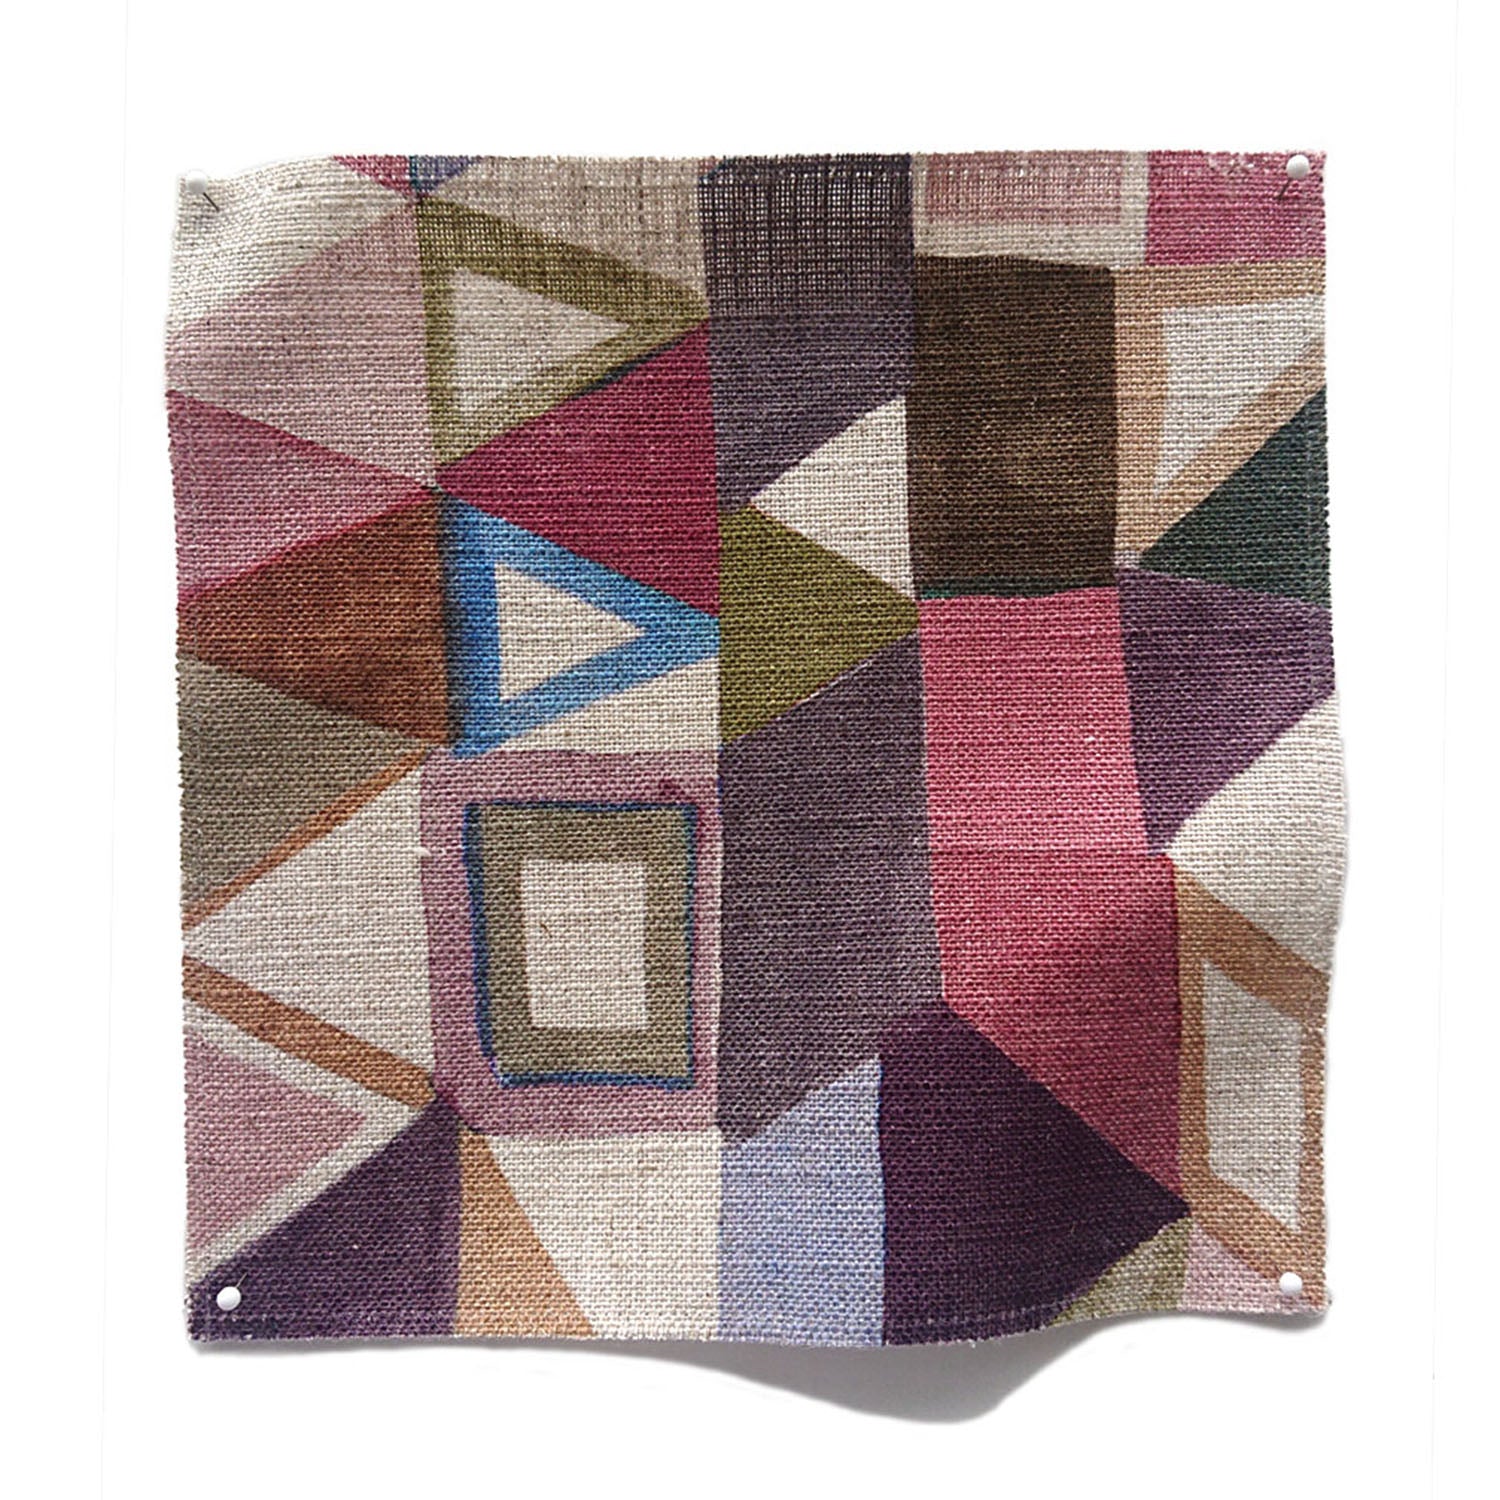 Square fabric swatch in a playful repeating geometric print in shades of pink, purple, cream and green.